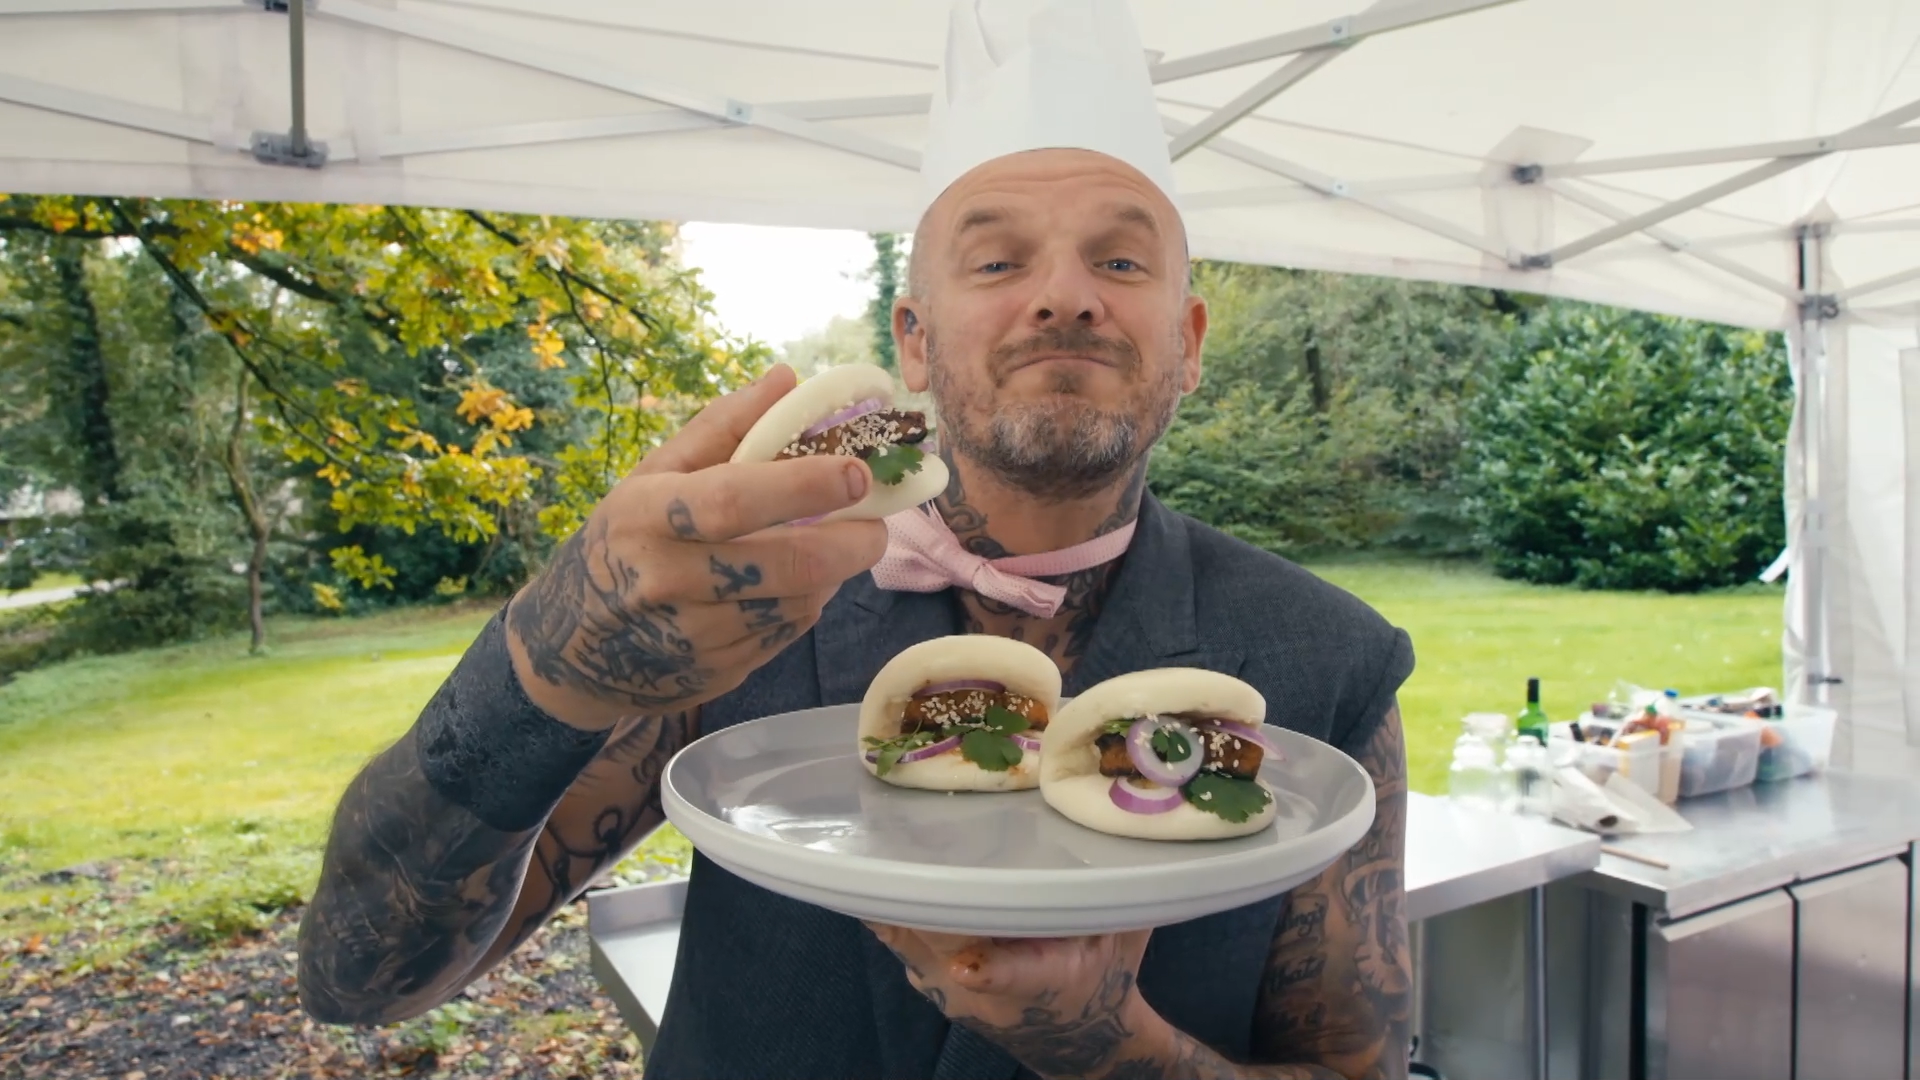 Matt Pritchard wearing a chefs hat in a marque in a garden holding up a bao bun and holding a play with two other bao buns.